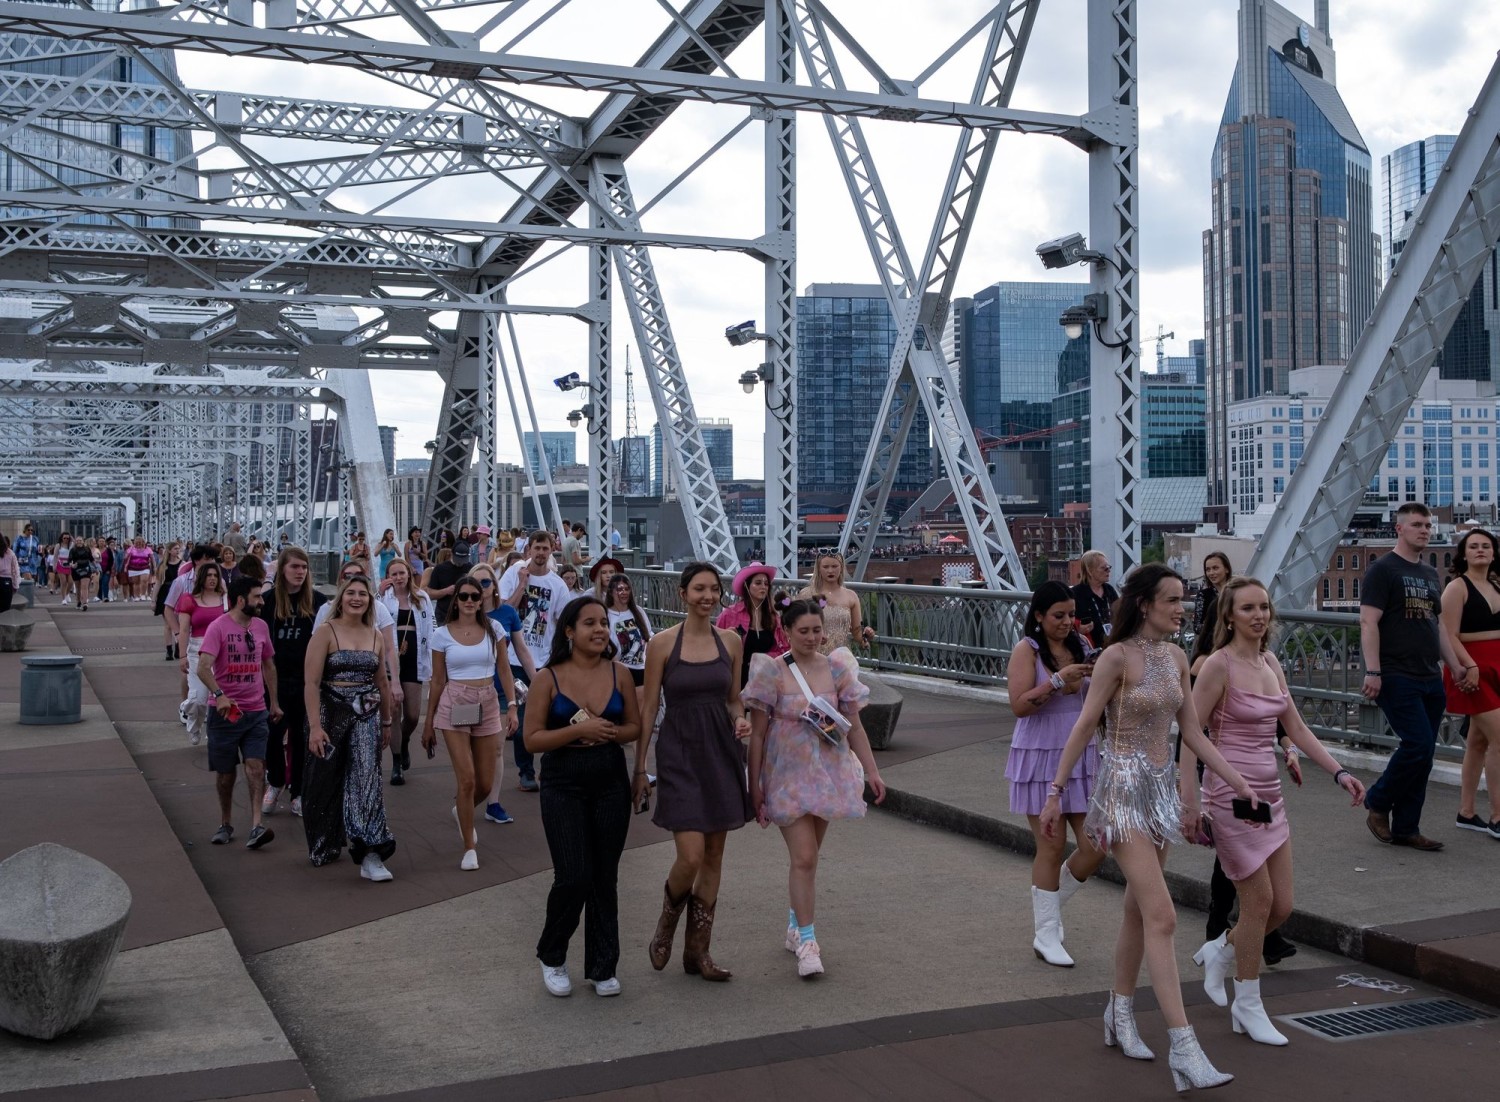 Fans made their way across the People’s Bridge to Nissan Stadium in Nashville ahead of Taylor Swift’s May 6 concert. SETH HERALD/GETTY IMAGES